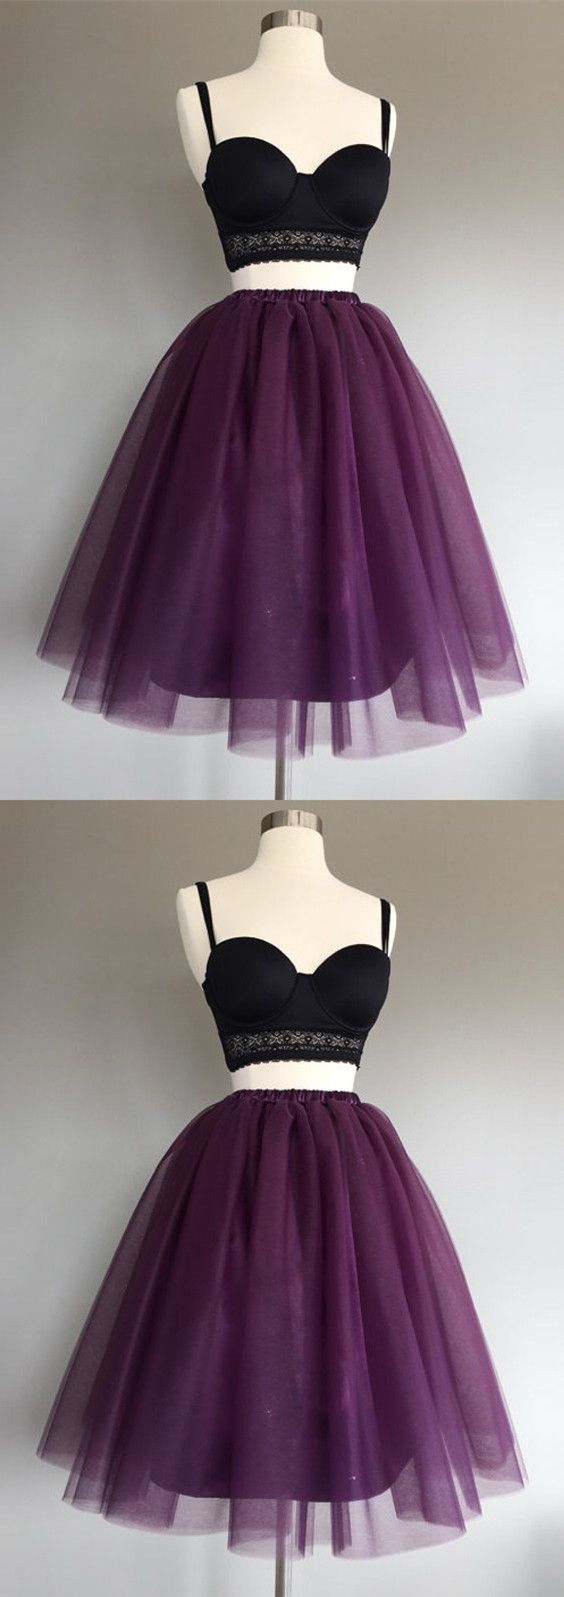 Wedding - Two Piece A-Line Spaghetti Straps Grape Tulle Short Homecoming Dress